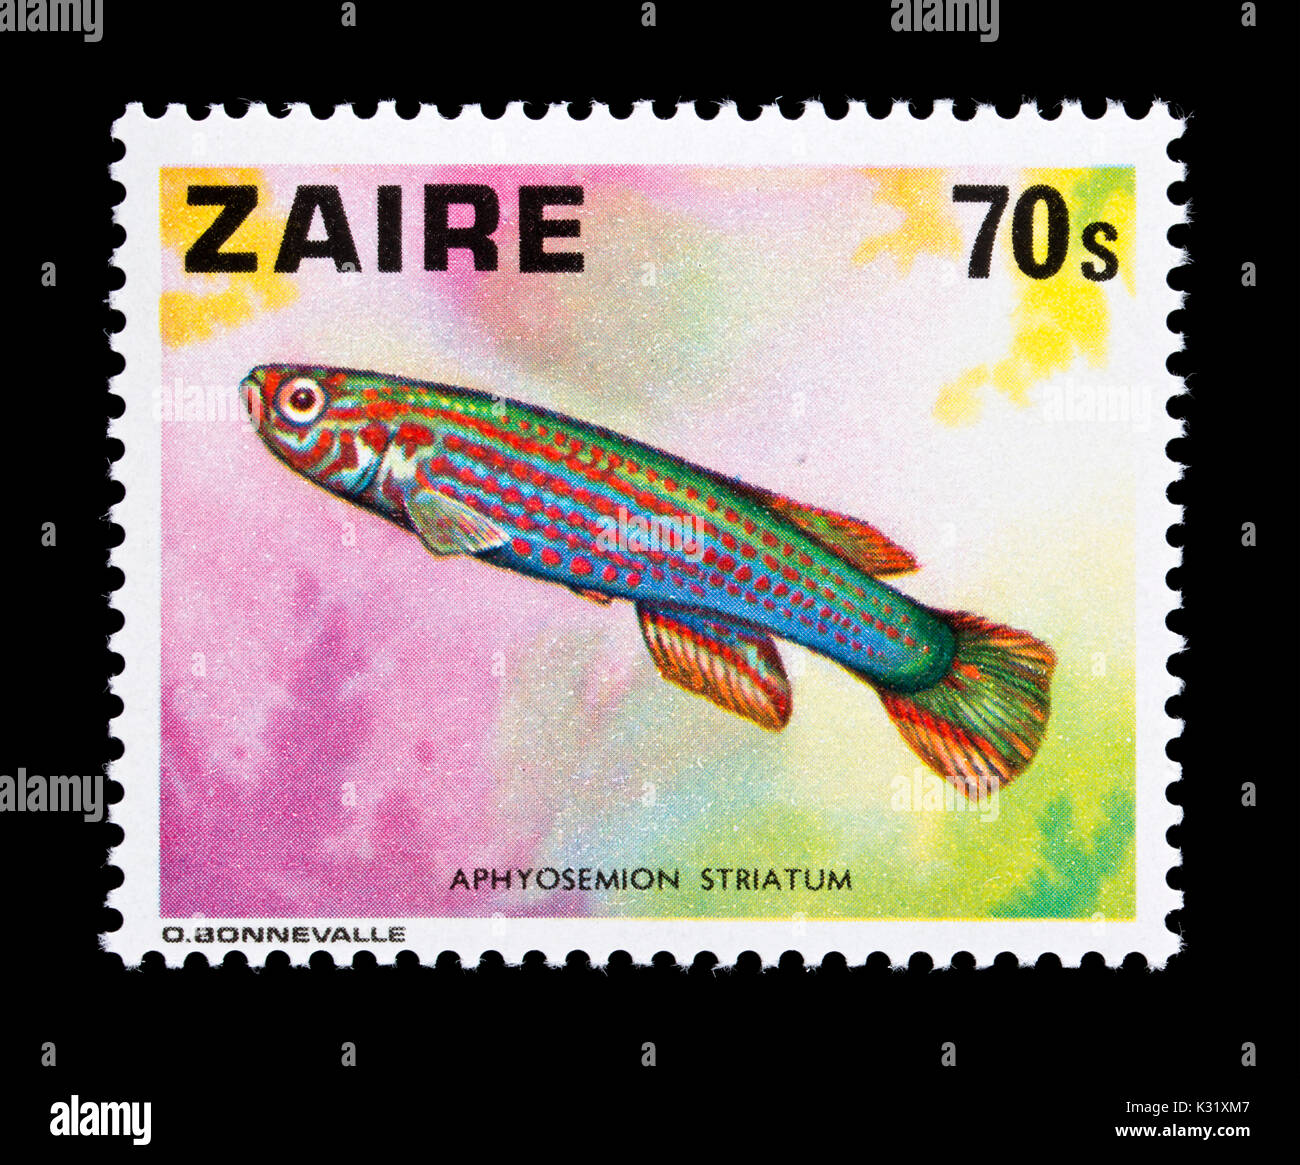 Postage stamp from Zaire depicting a (Aphyosemion striatum) Stock Photo